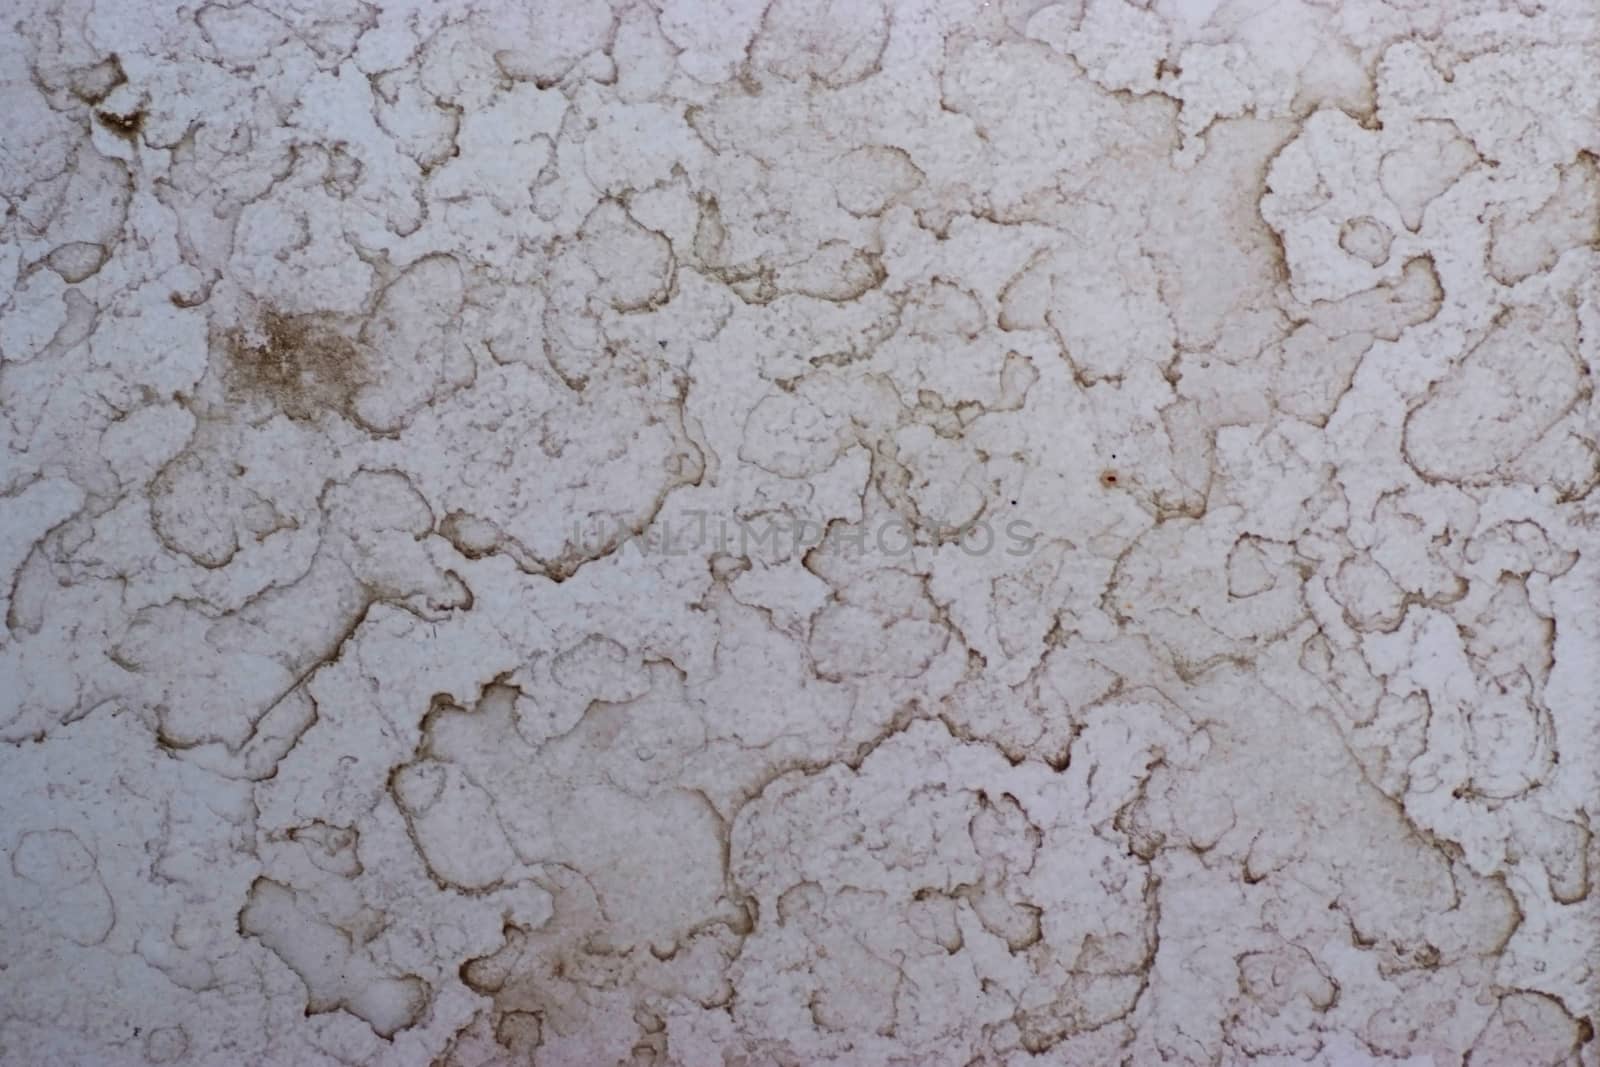 Stains dirty on the white floor